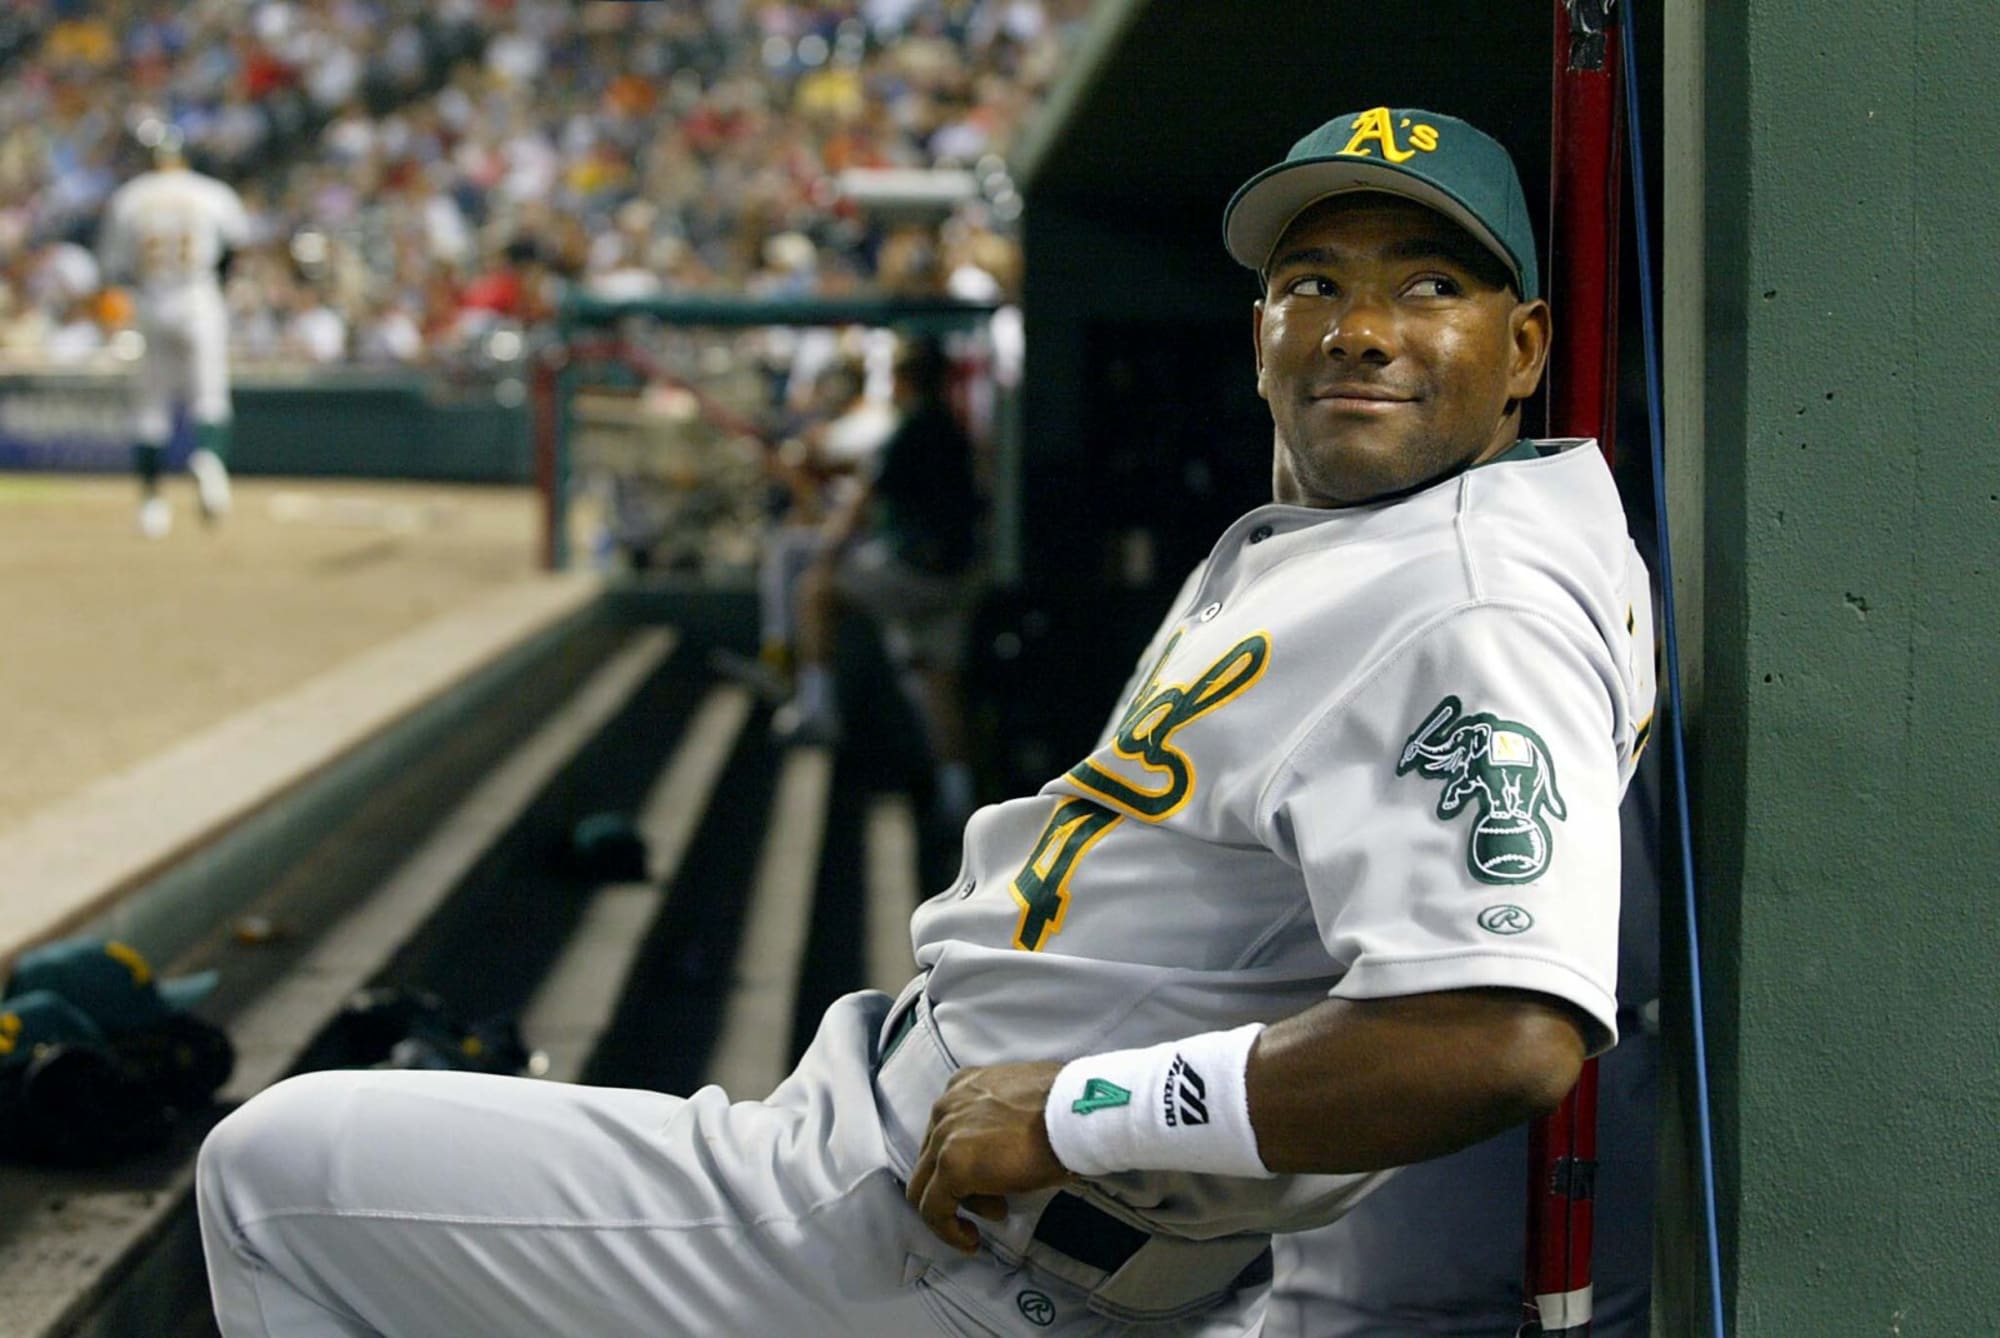 Arrest warrant issued for former Oakland A's star Miguel Tejada